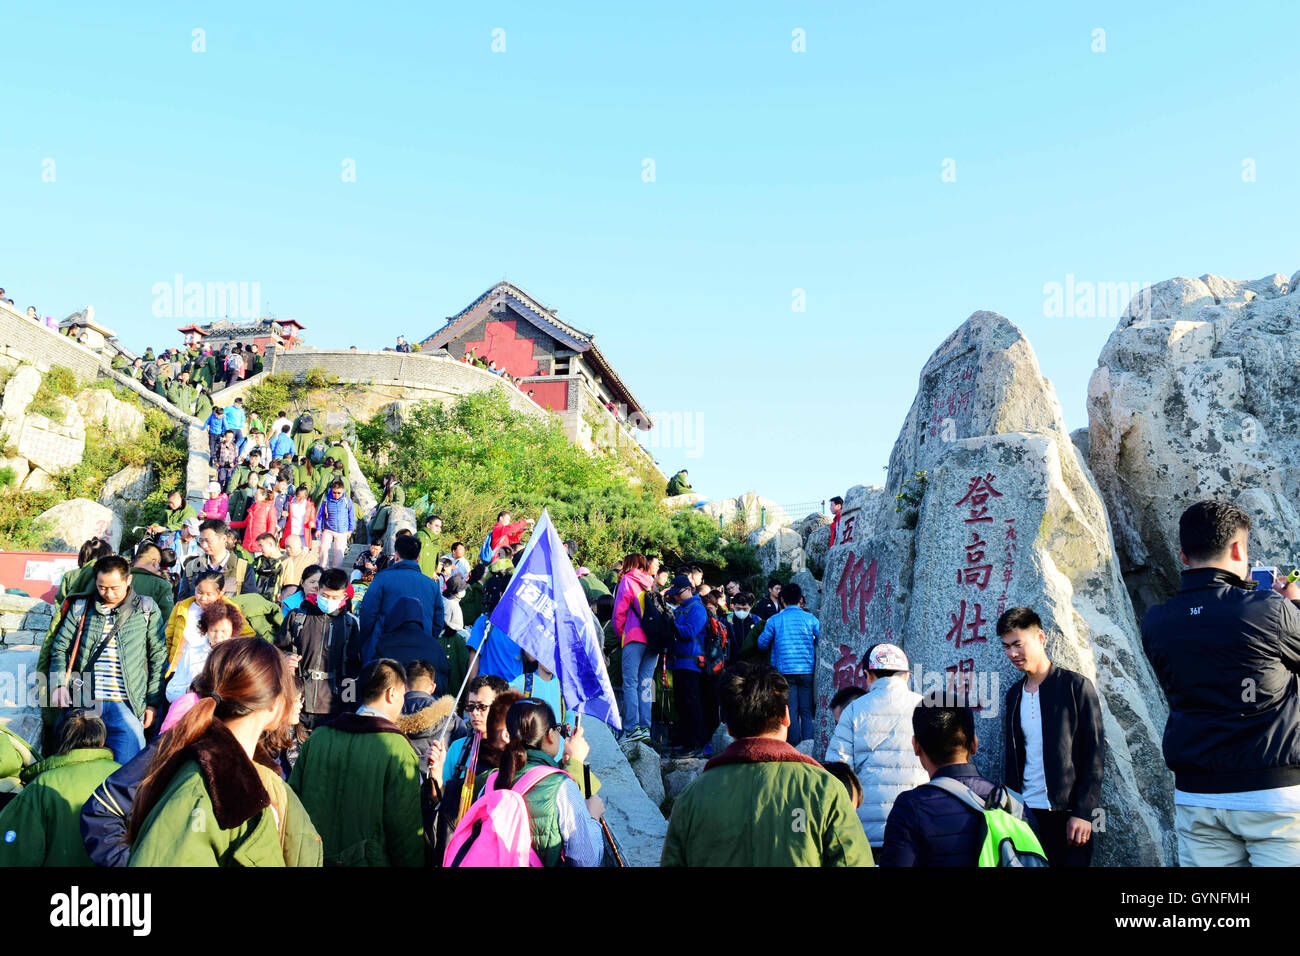 September 19, 2016 - Tai'An, Tai'an, China - TaiÂ¡Â¯an, CHINA-September 17 2016:?(EDITORIAL?USE?ONLY.?CHINA?OUT) Tourists at the Mount Tai in TaiÂ¡Â¯an, east ChinaÂ¡Â¯s Shandong Province, on September 17, 2016. The tourist flow of Mount Tai rose to 39,420 from September 15 to September 16 during the Mid-Autumn Festival. Many tourists climbed the Mount Tai on night, which made it possible for them to enjoy the full moon during night and see the sunrise on the dawn. © SIPA Asia/ZUMA Wire/Alamy Live News Stock Photo